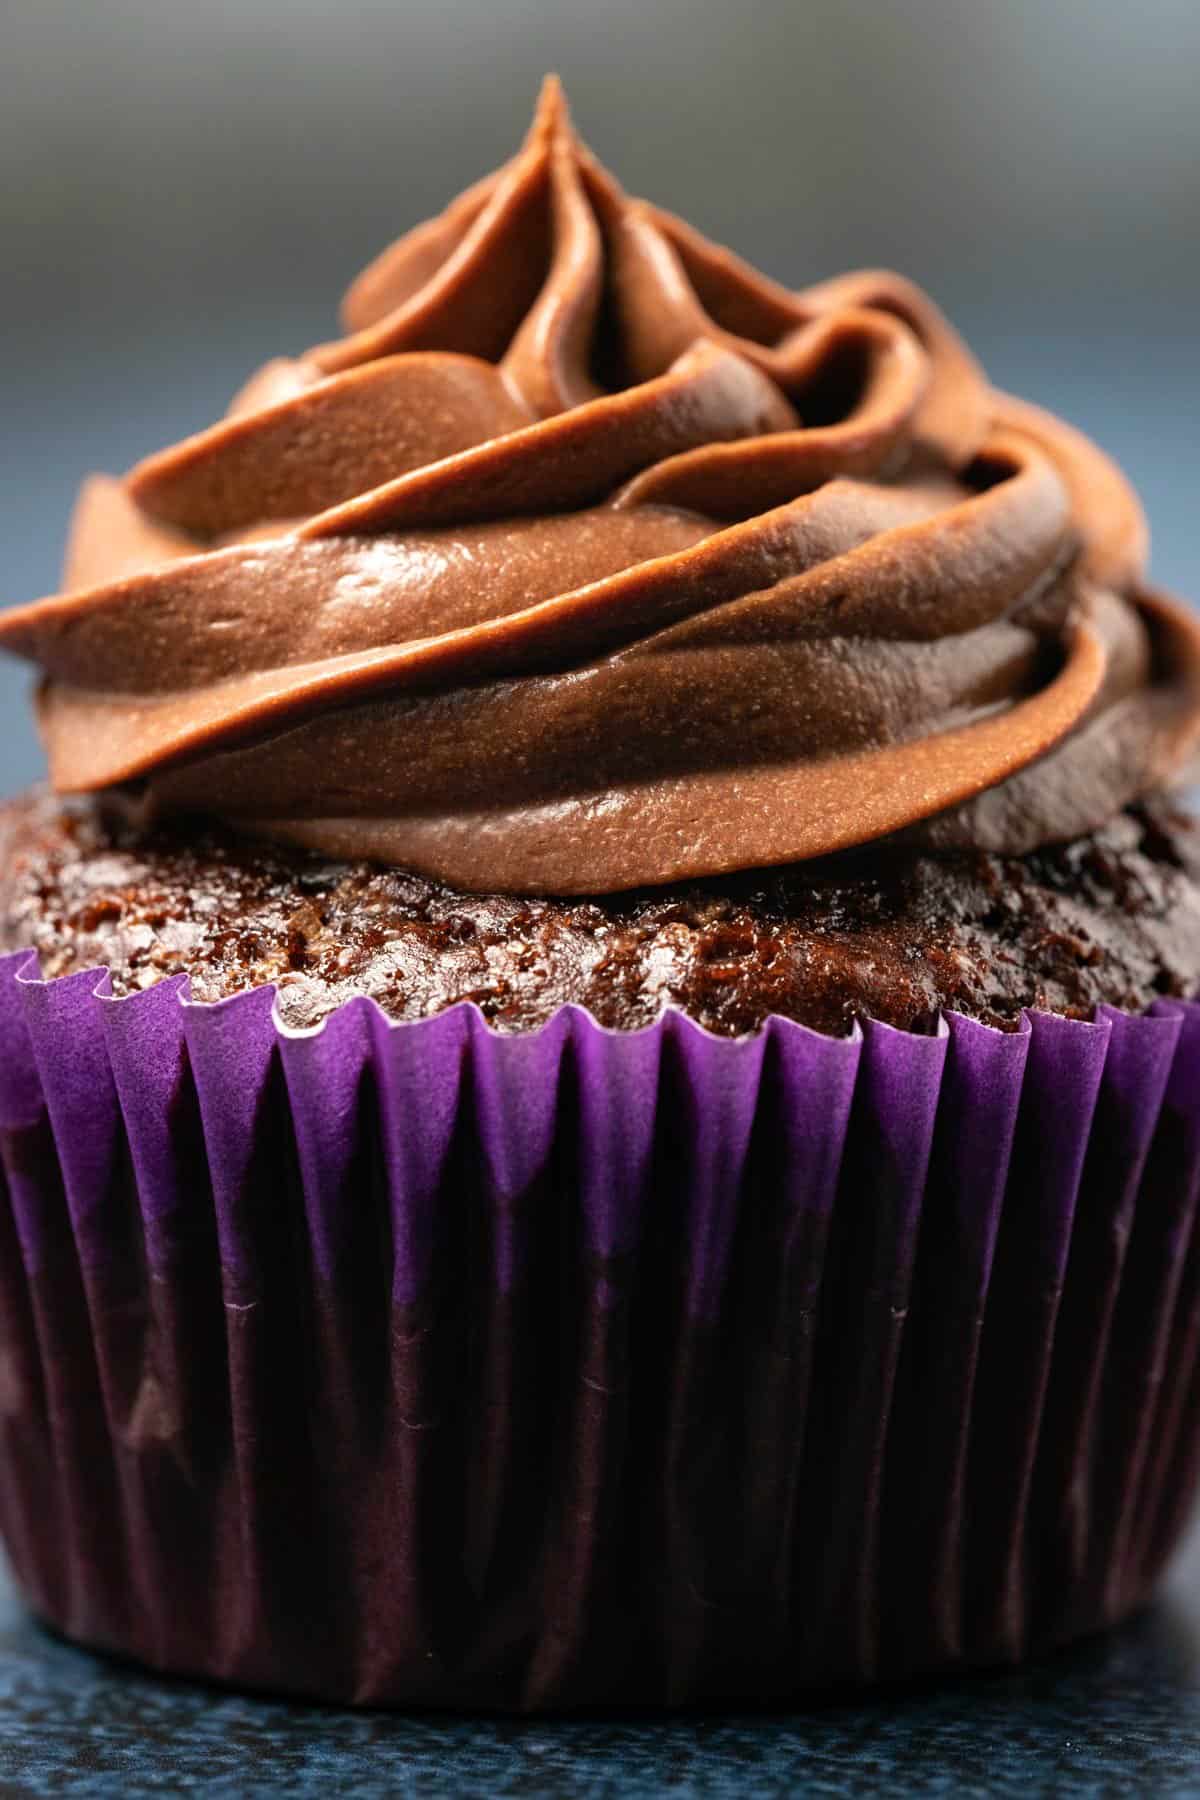 Chocolate cupcake topped with whipped vegan ganache frosting.